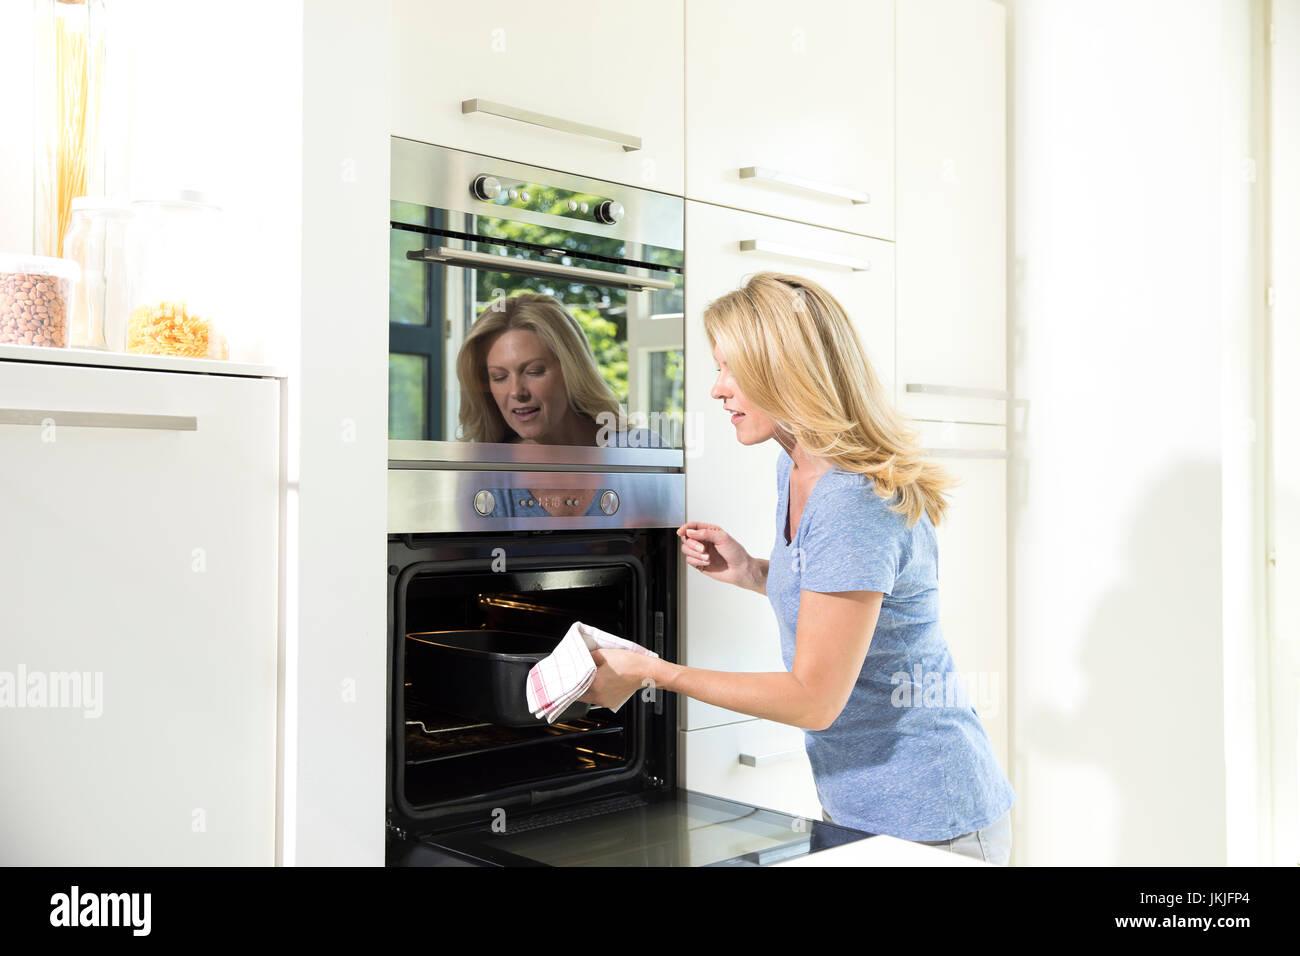 Woman in kitchen taking casserole dish out of oven Stock Photo